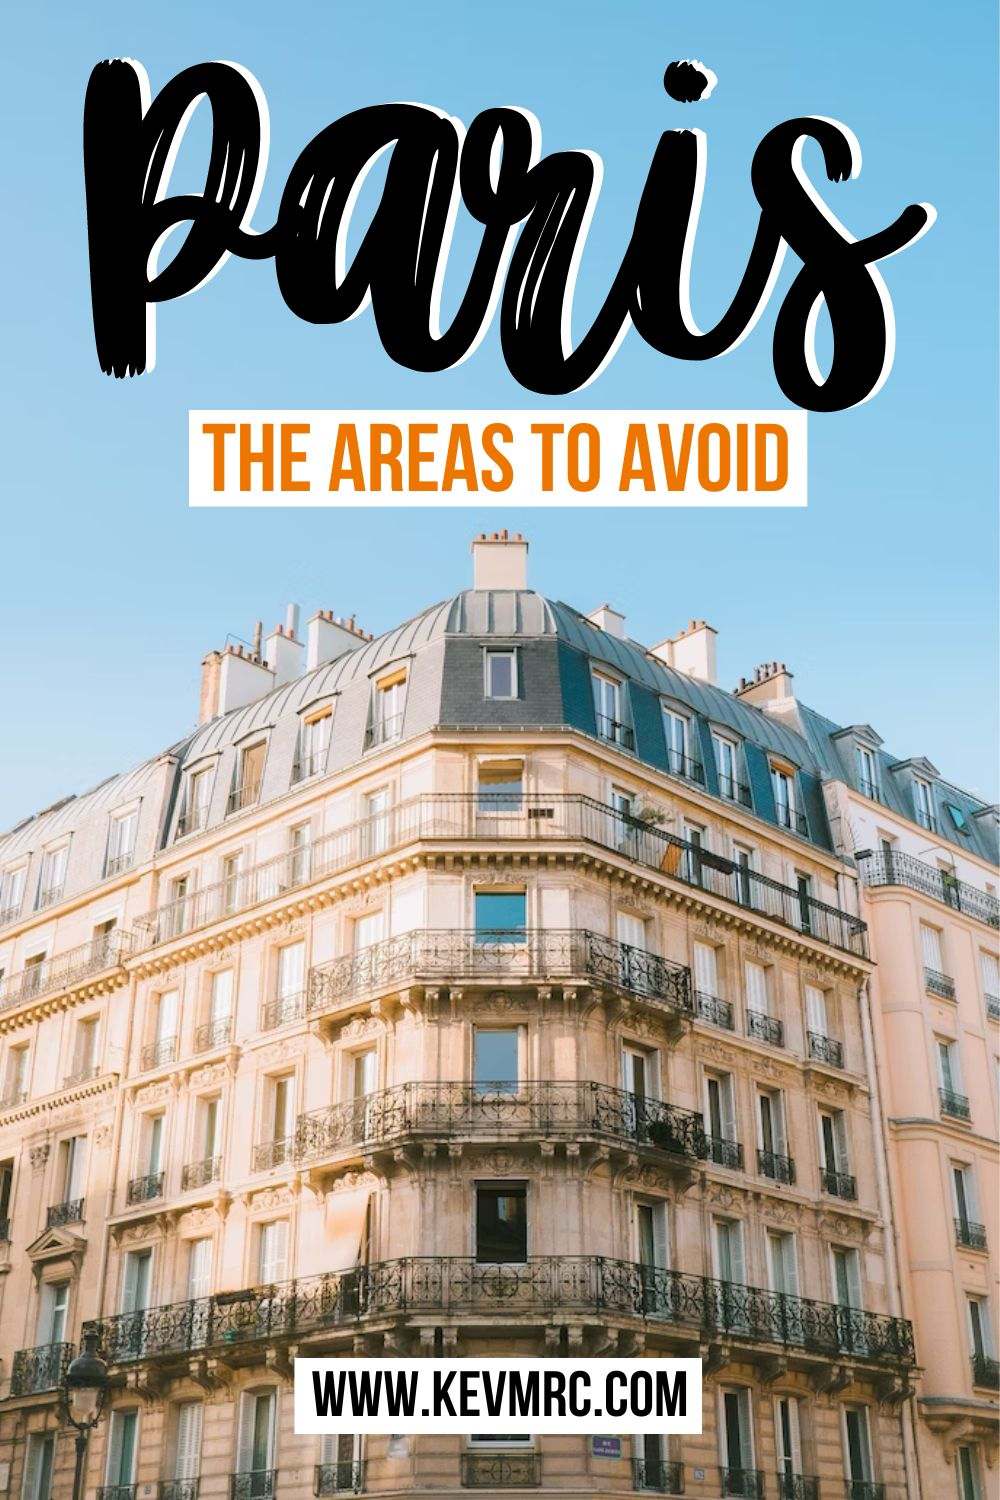 Going to Paris soon and wondering where not to go? Here are the most dangerous areas in Paris to avoid and why + tips to stay safe. areas to avoid in Paris | paris neighborhood guide | paris district guide